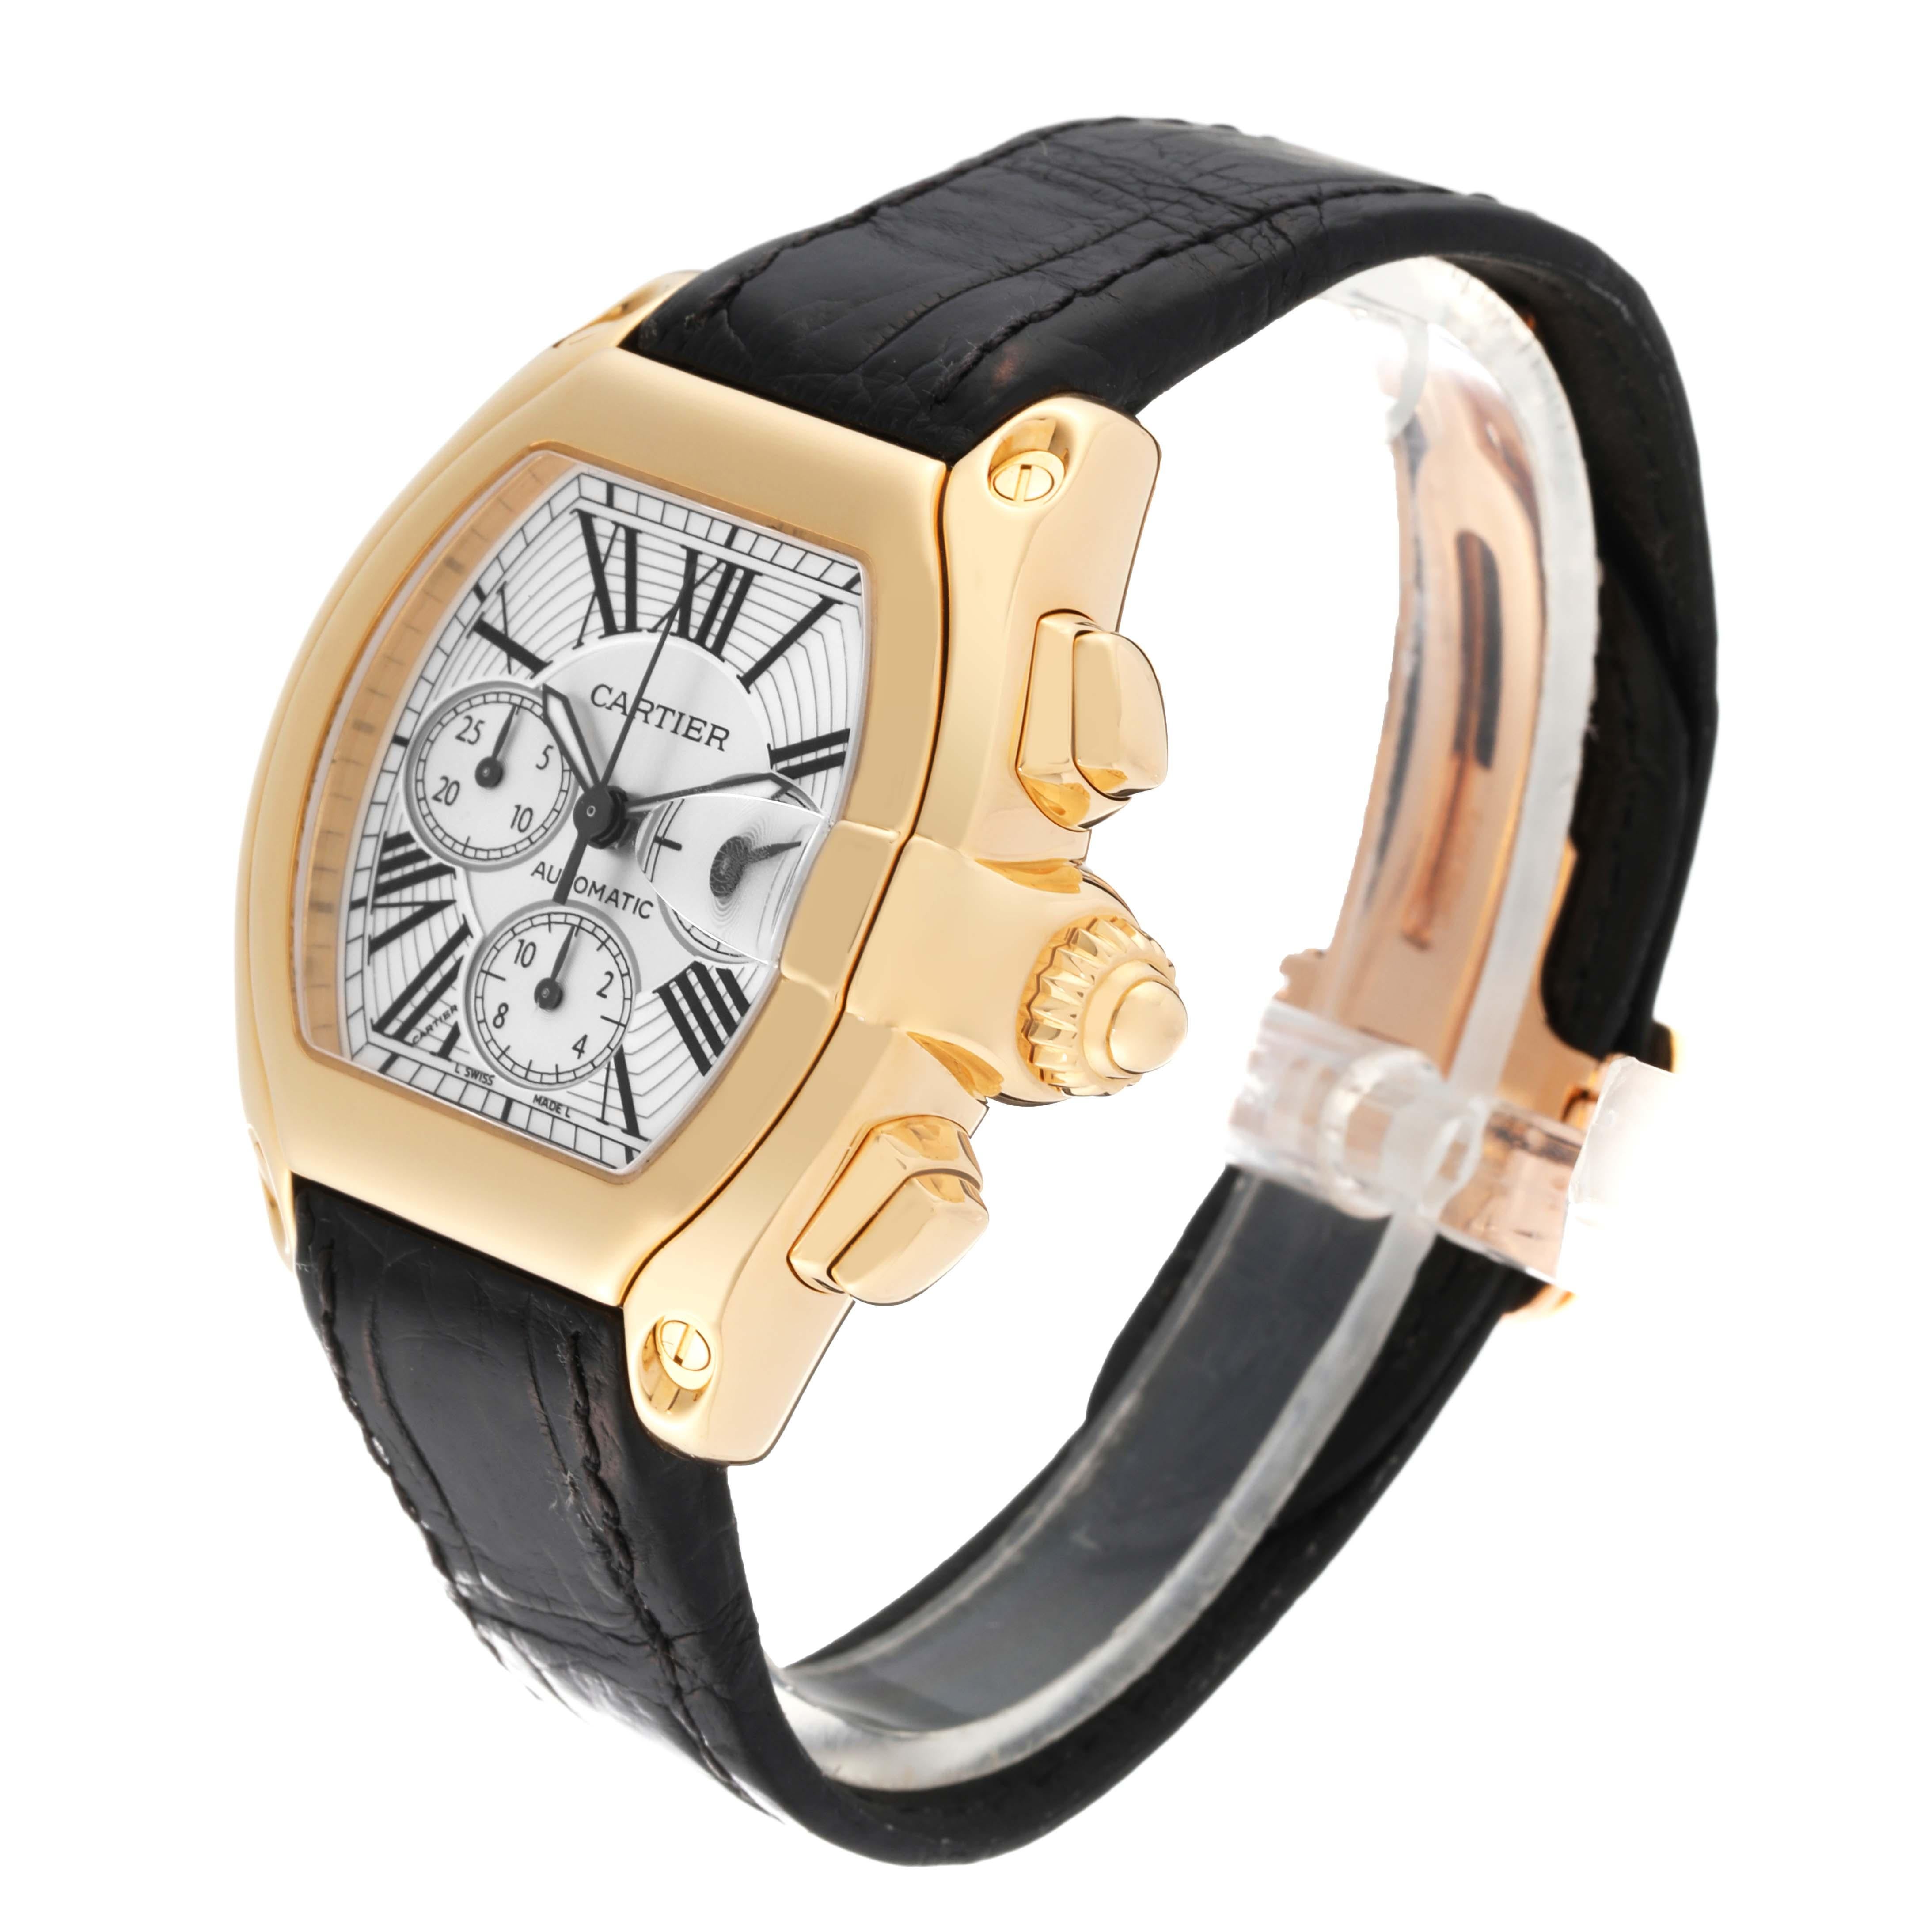 Cartier Roadster Chronograph Yellow Gold Black Strap Mens Watch W62021Y3. Automatic self-winding movement with chronograph function. 18K yellow gold tonneau case, 47 x 43 mm. . Scratch resistant sapphire crystal with cyclops magnifier. Silver sunray